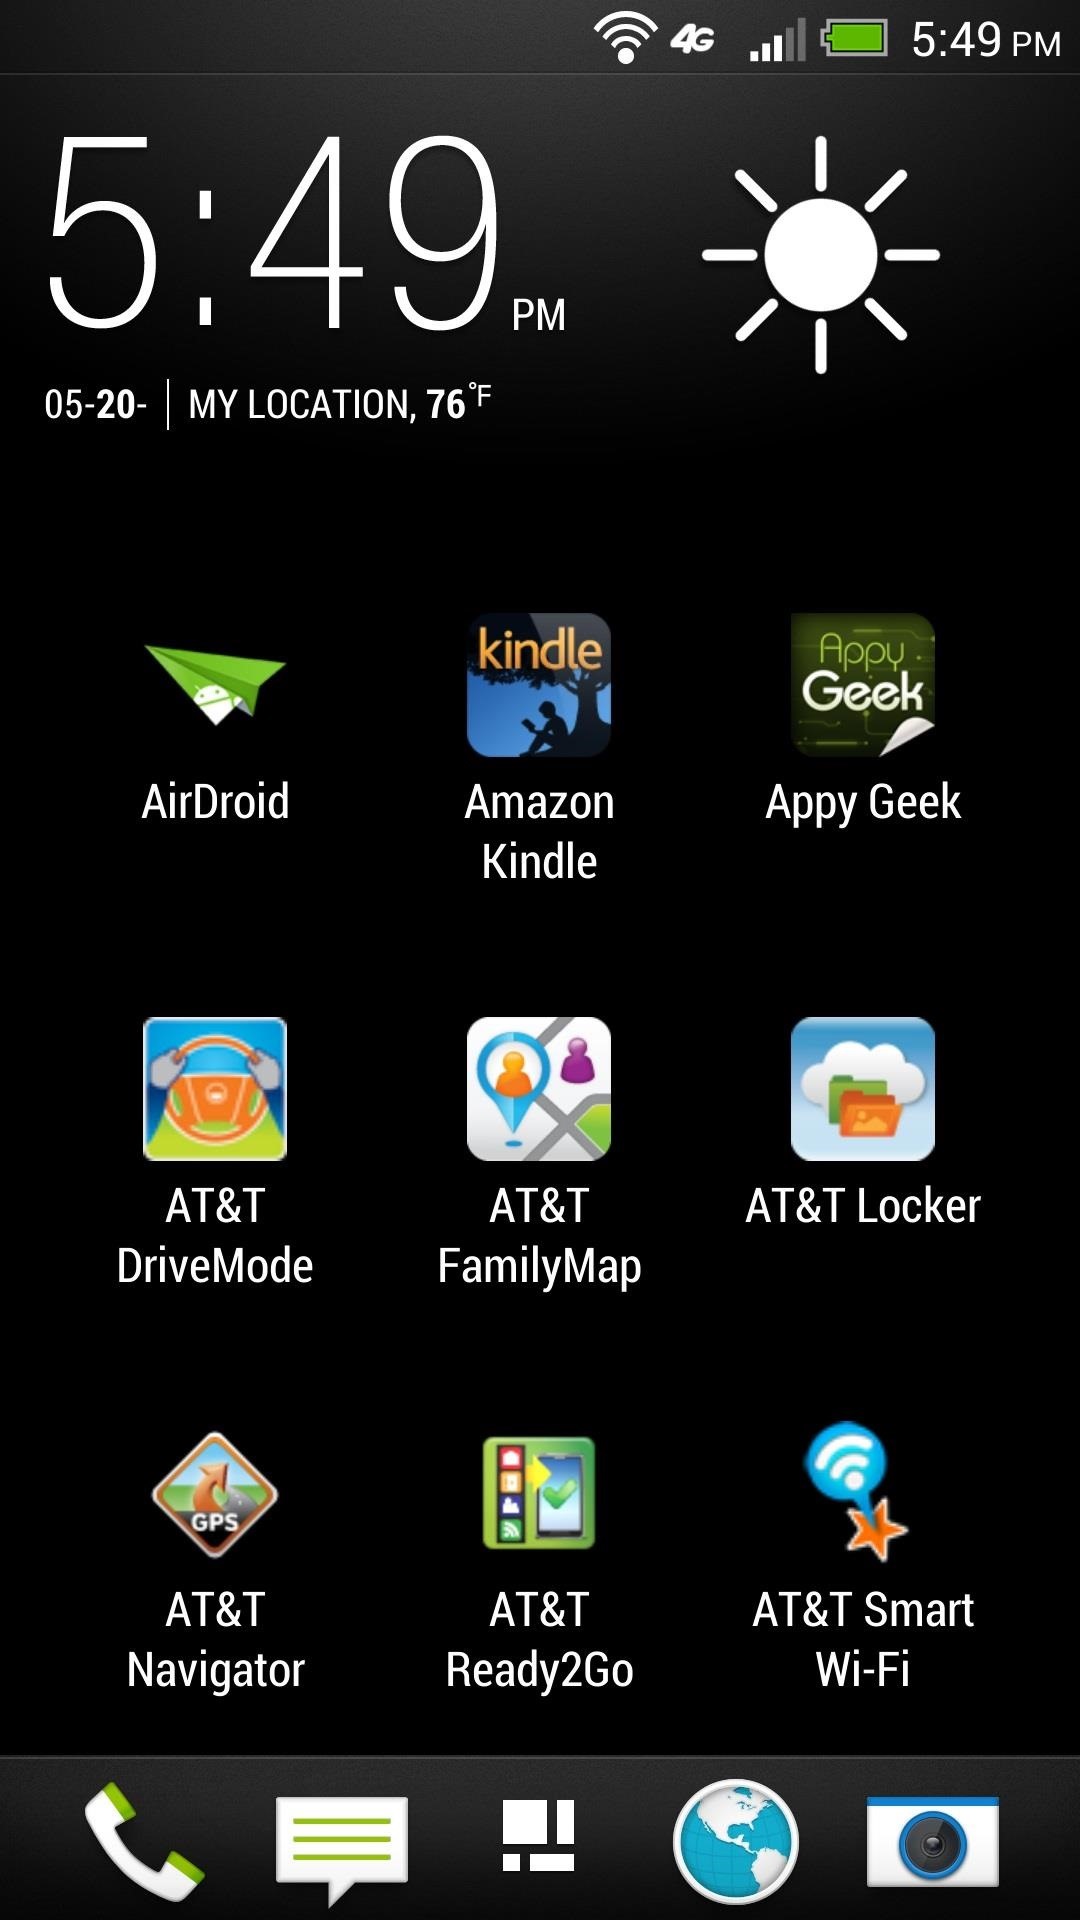 How to Revert Back to a More Traditional Sense-Style Home Screen on Your HTC One